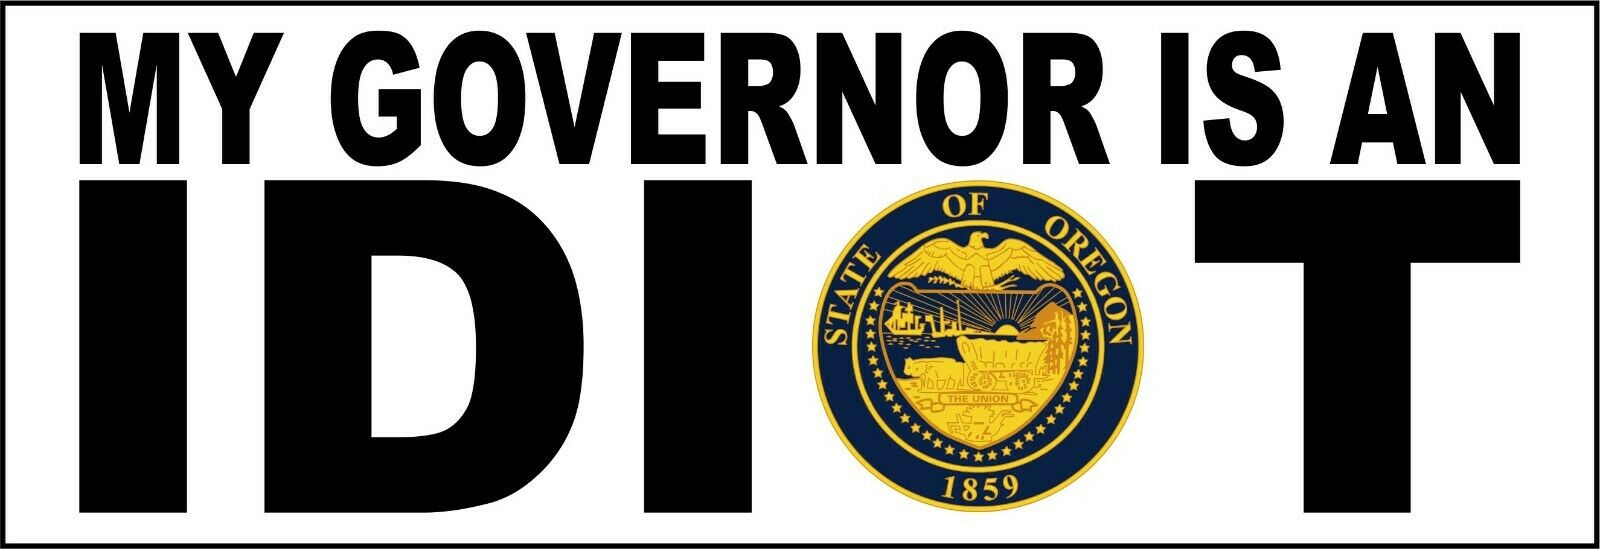 My governor is an idiot bumper sticker - State of Oregon Version - 8.7" x 3" - Powercall Sirens LLC